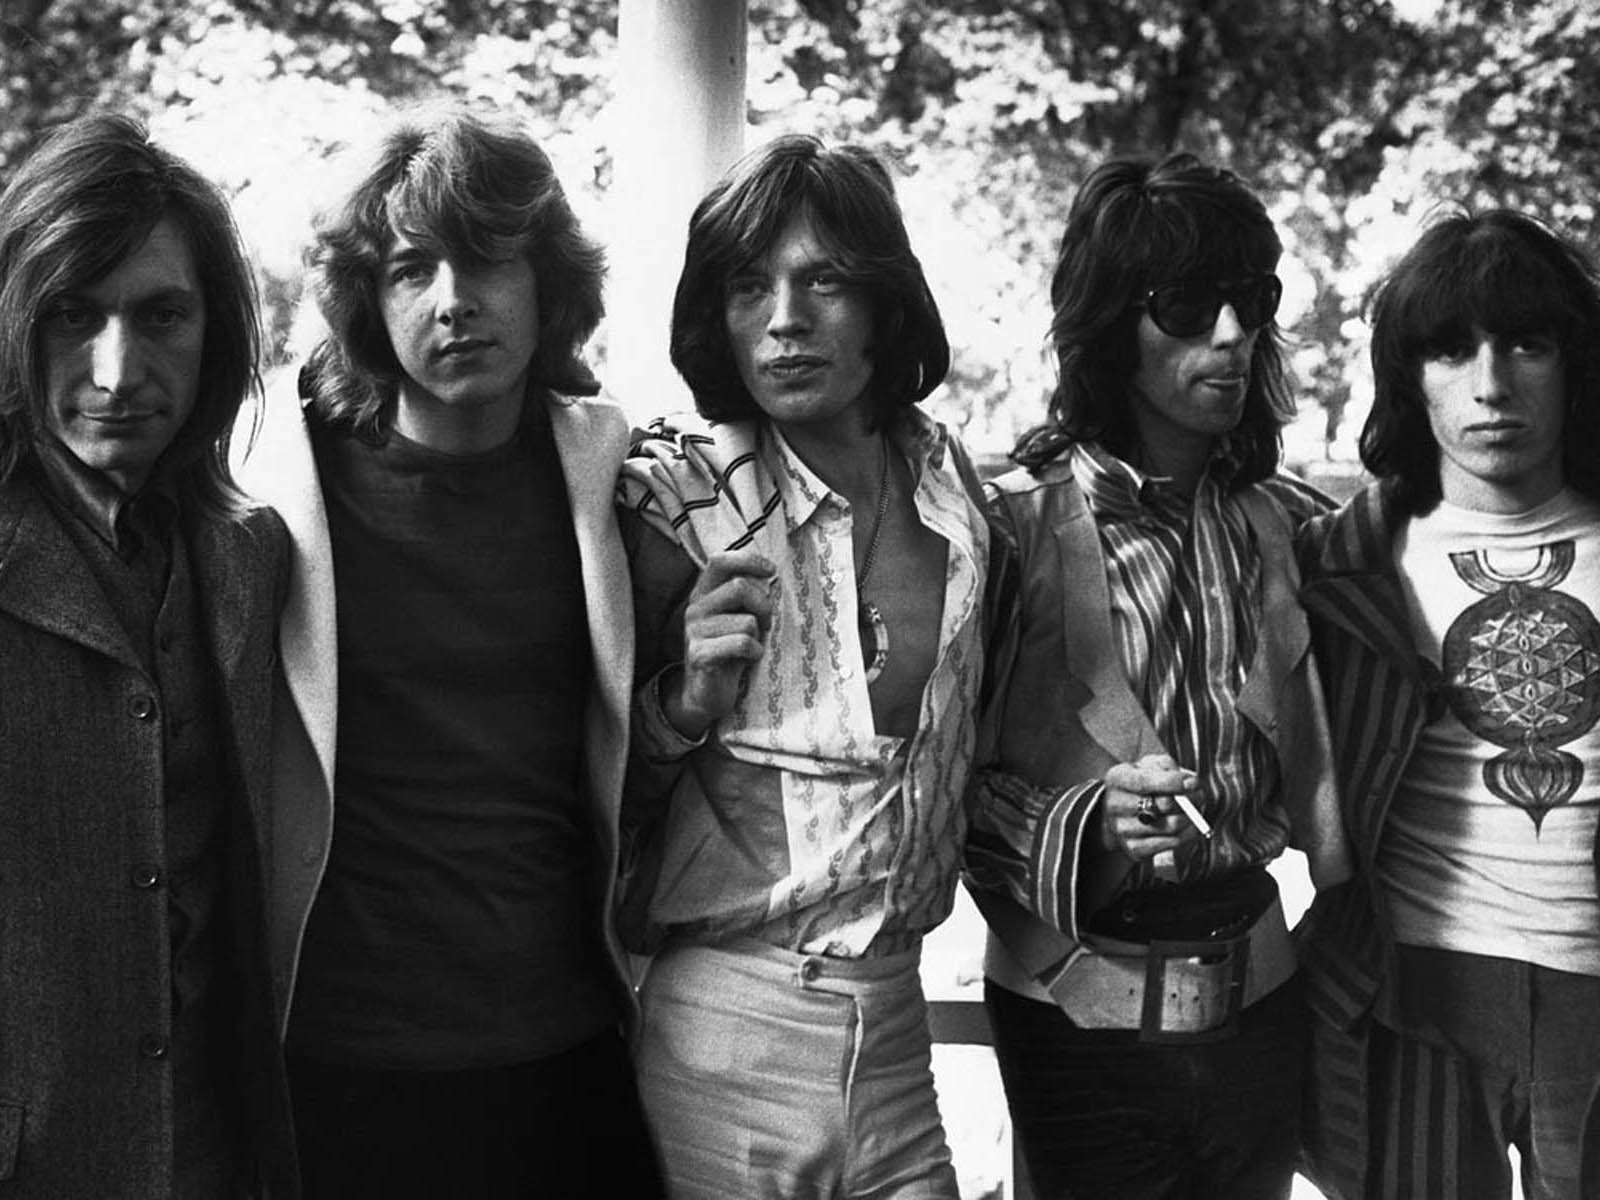  WallpapersThe Rolling Stones Wallpapers Pictures Free Download